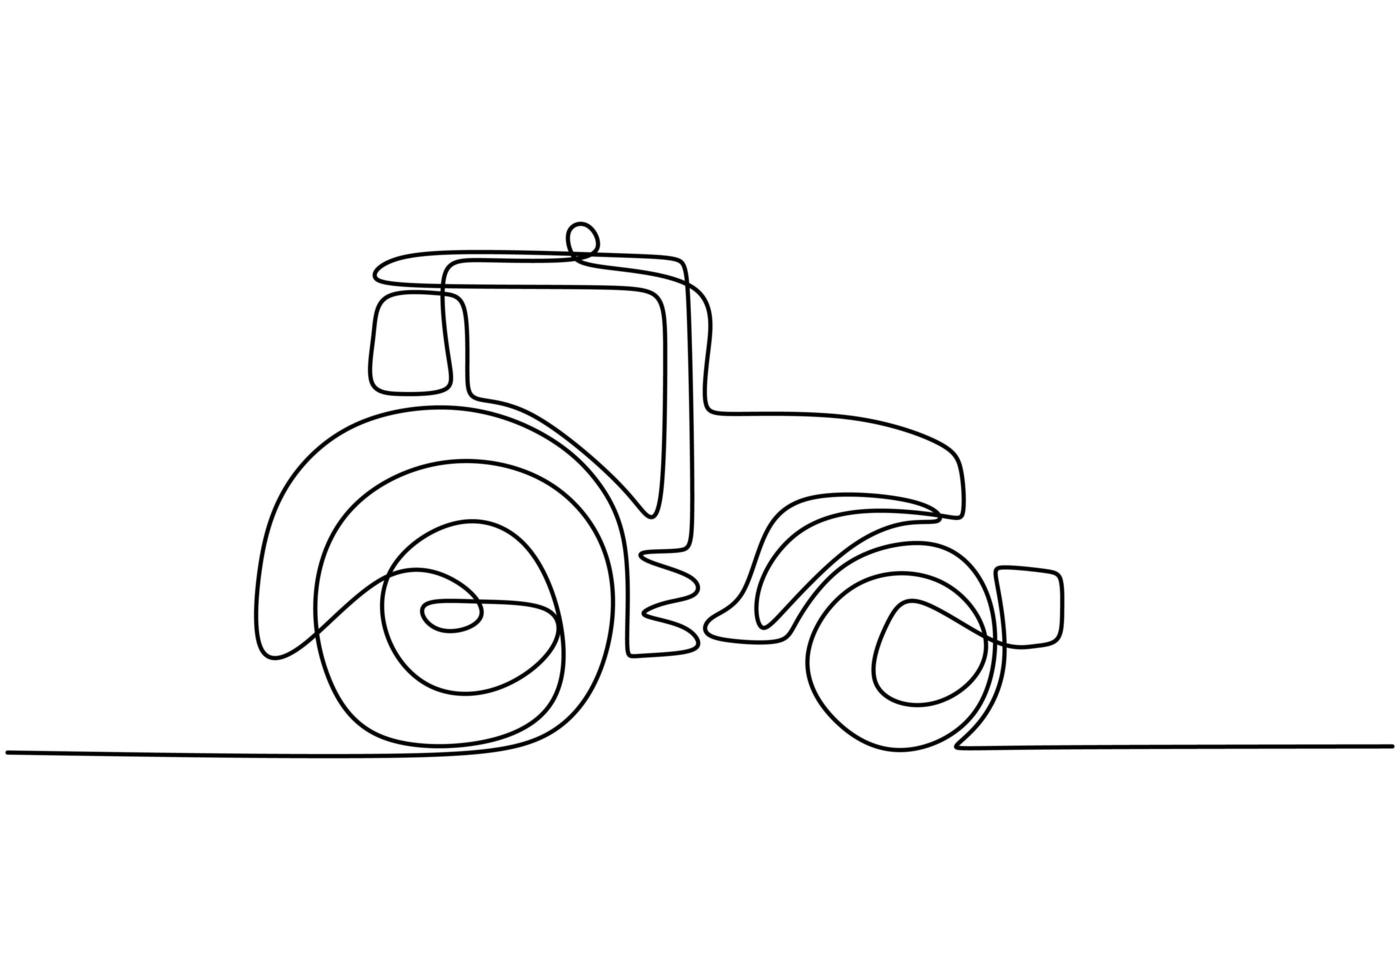 Continuous line drawing of vintage racing car driving on dusty road. Old retro vintage auto car. vector